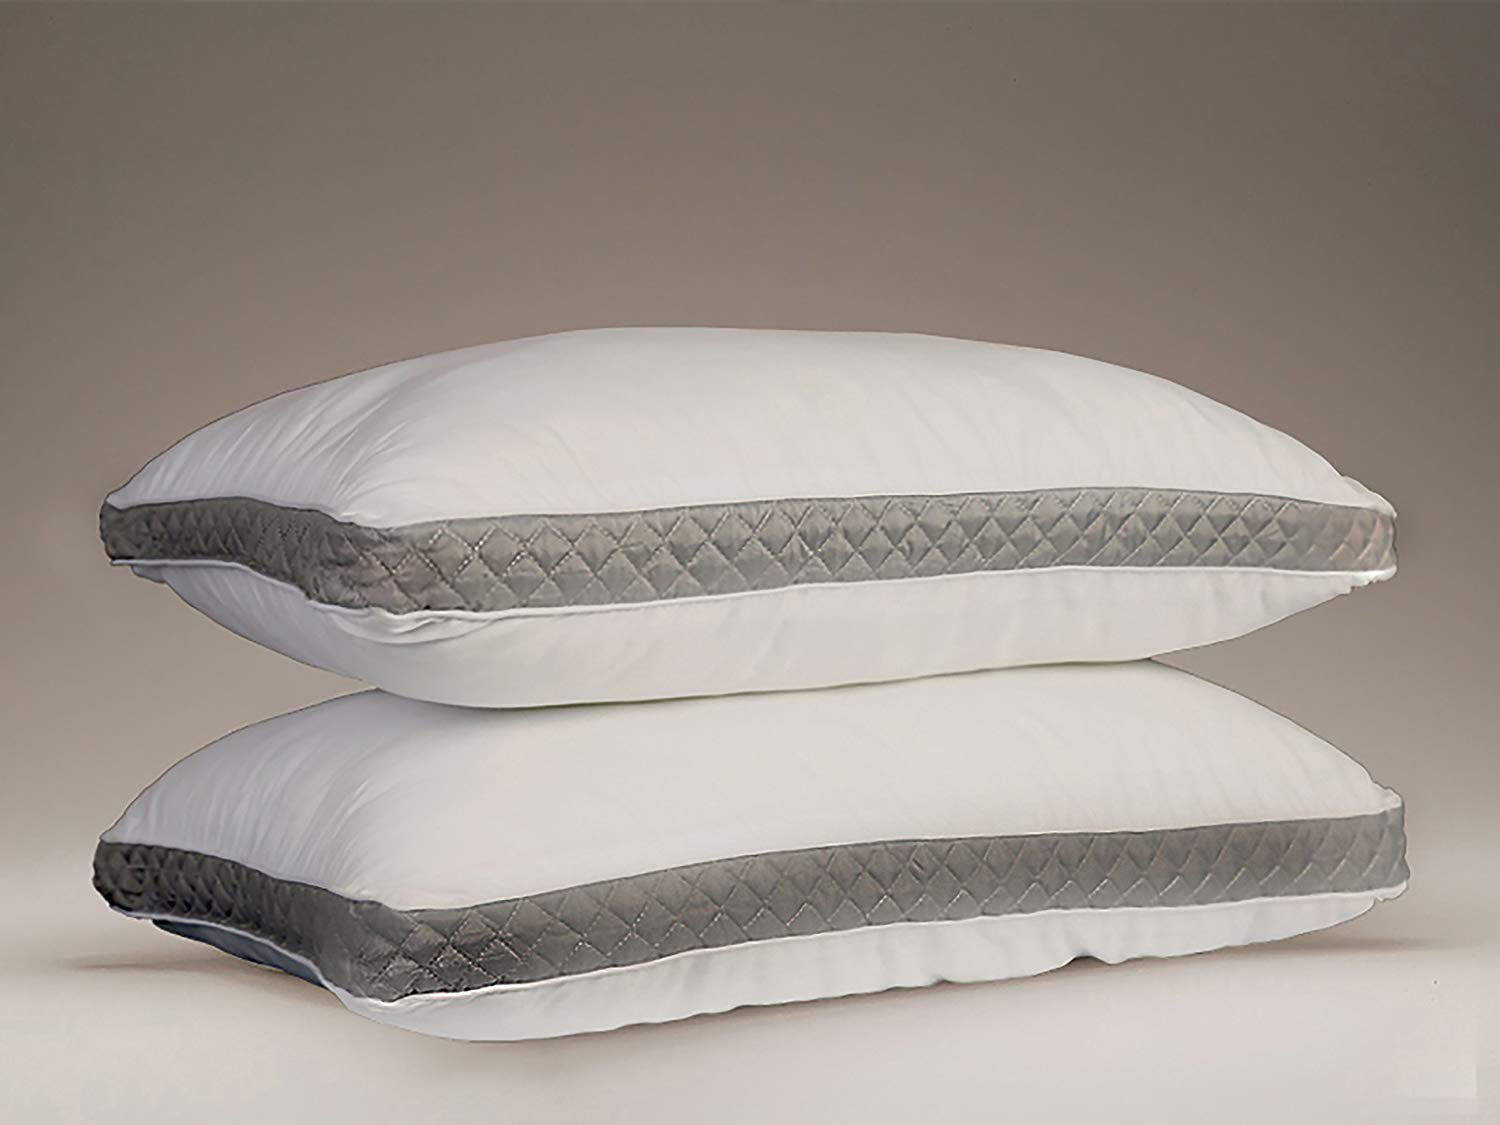 Lux Decor Collections Bed Pillows Queen, Grey Gussets